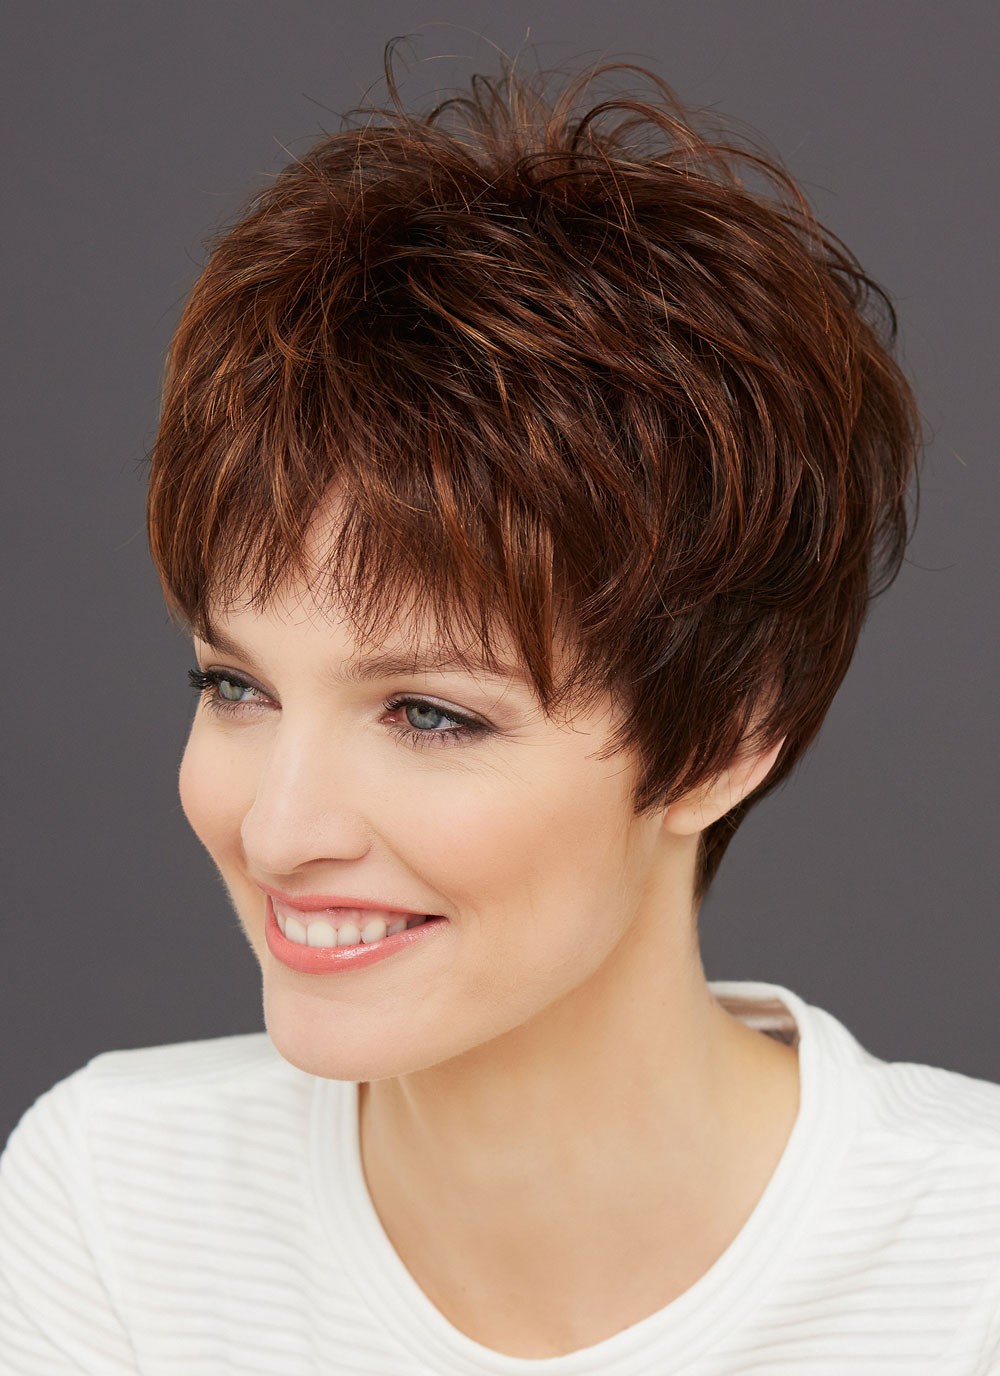 Timeless Light Brown Very Cut Women Wigs for Ladies Over 50, Pixie Wigs